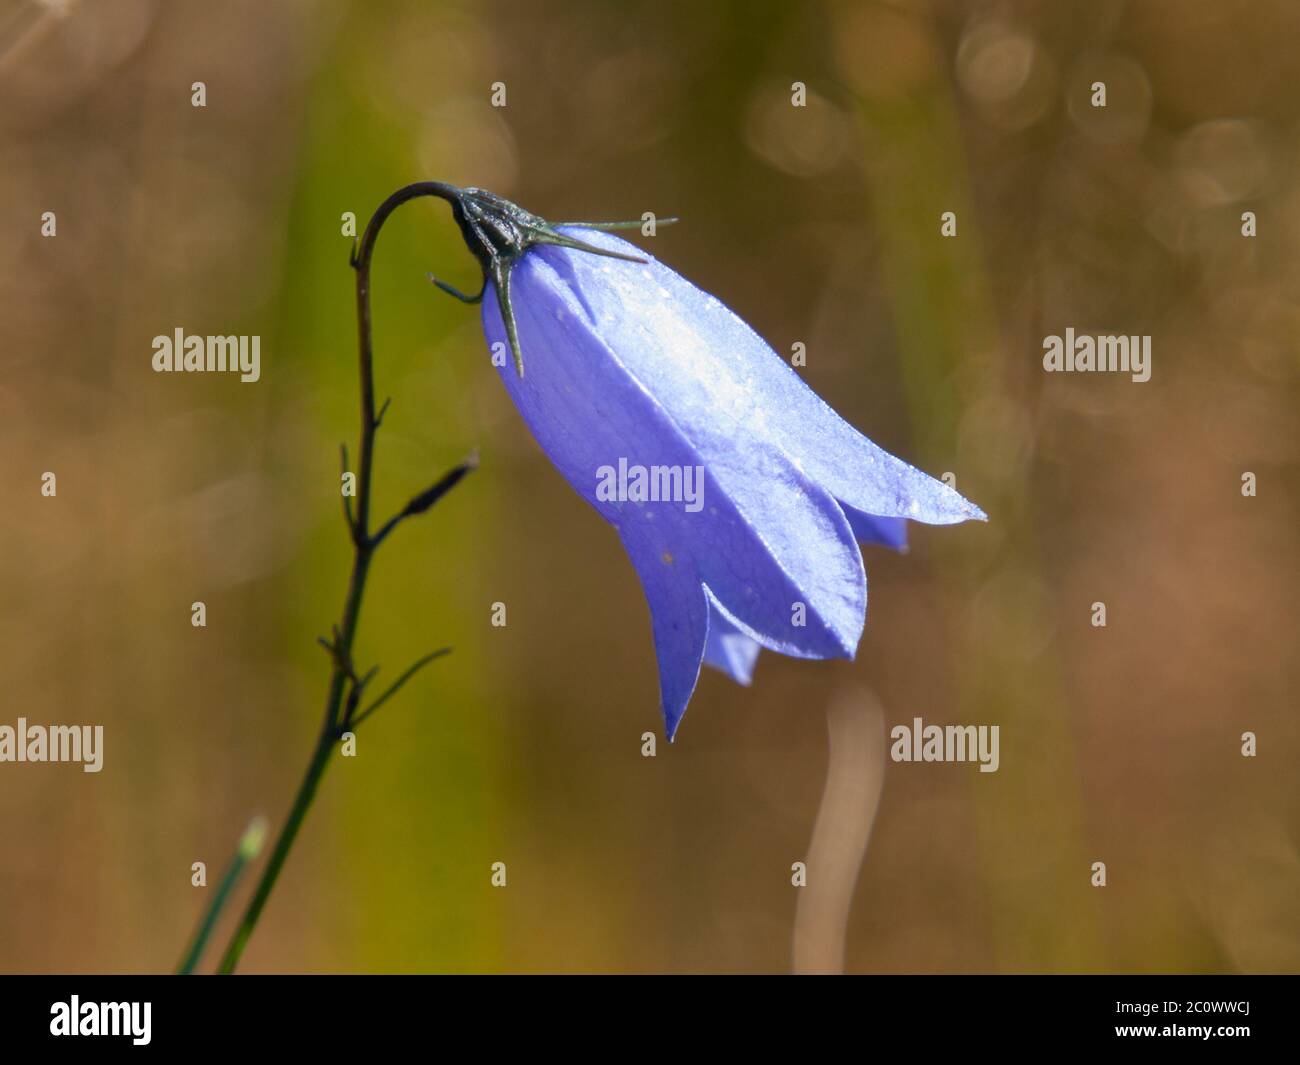 Violet meadow bellflower, aka Campanula, with green bokeh background. Shallow depth of field. Stock Photo